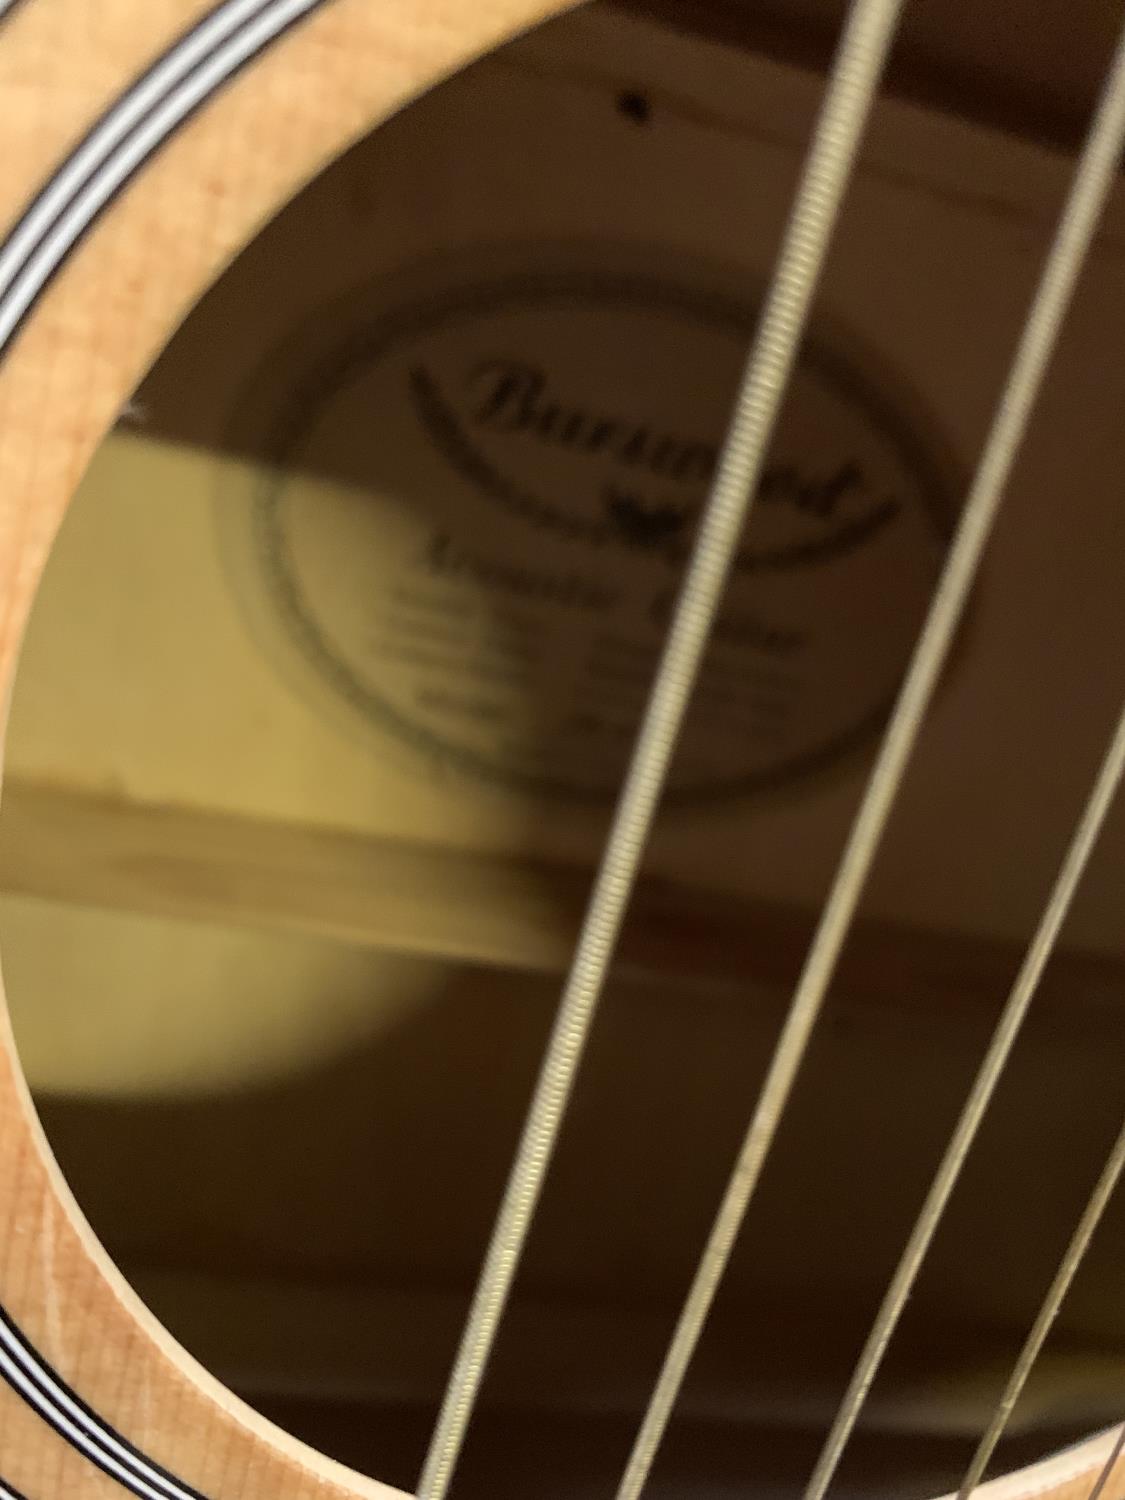 A BURSWOOD ACOUSTIC GUITAR - Image 3 of 4